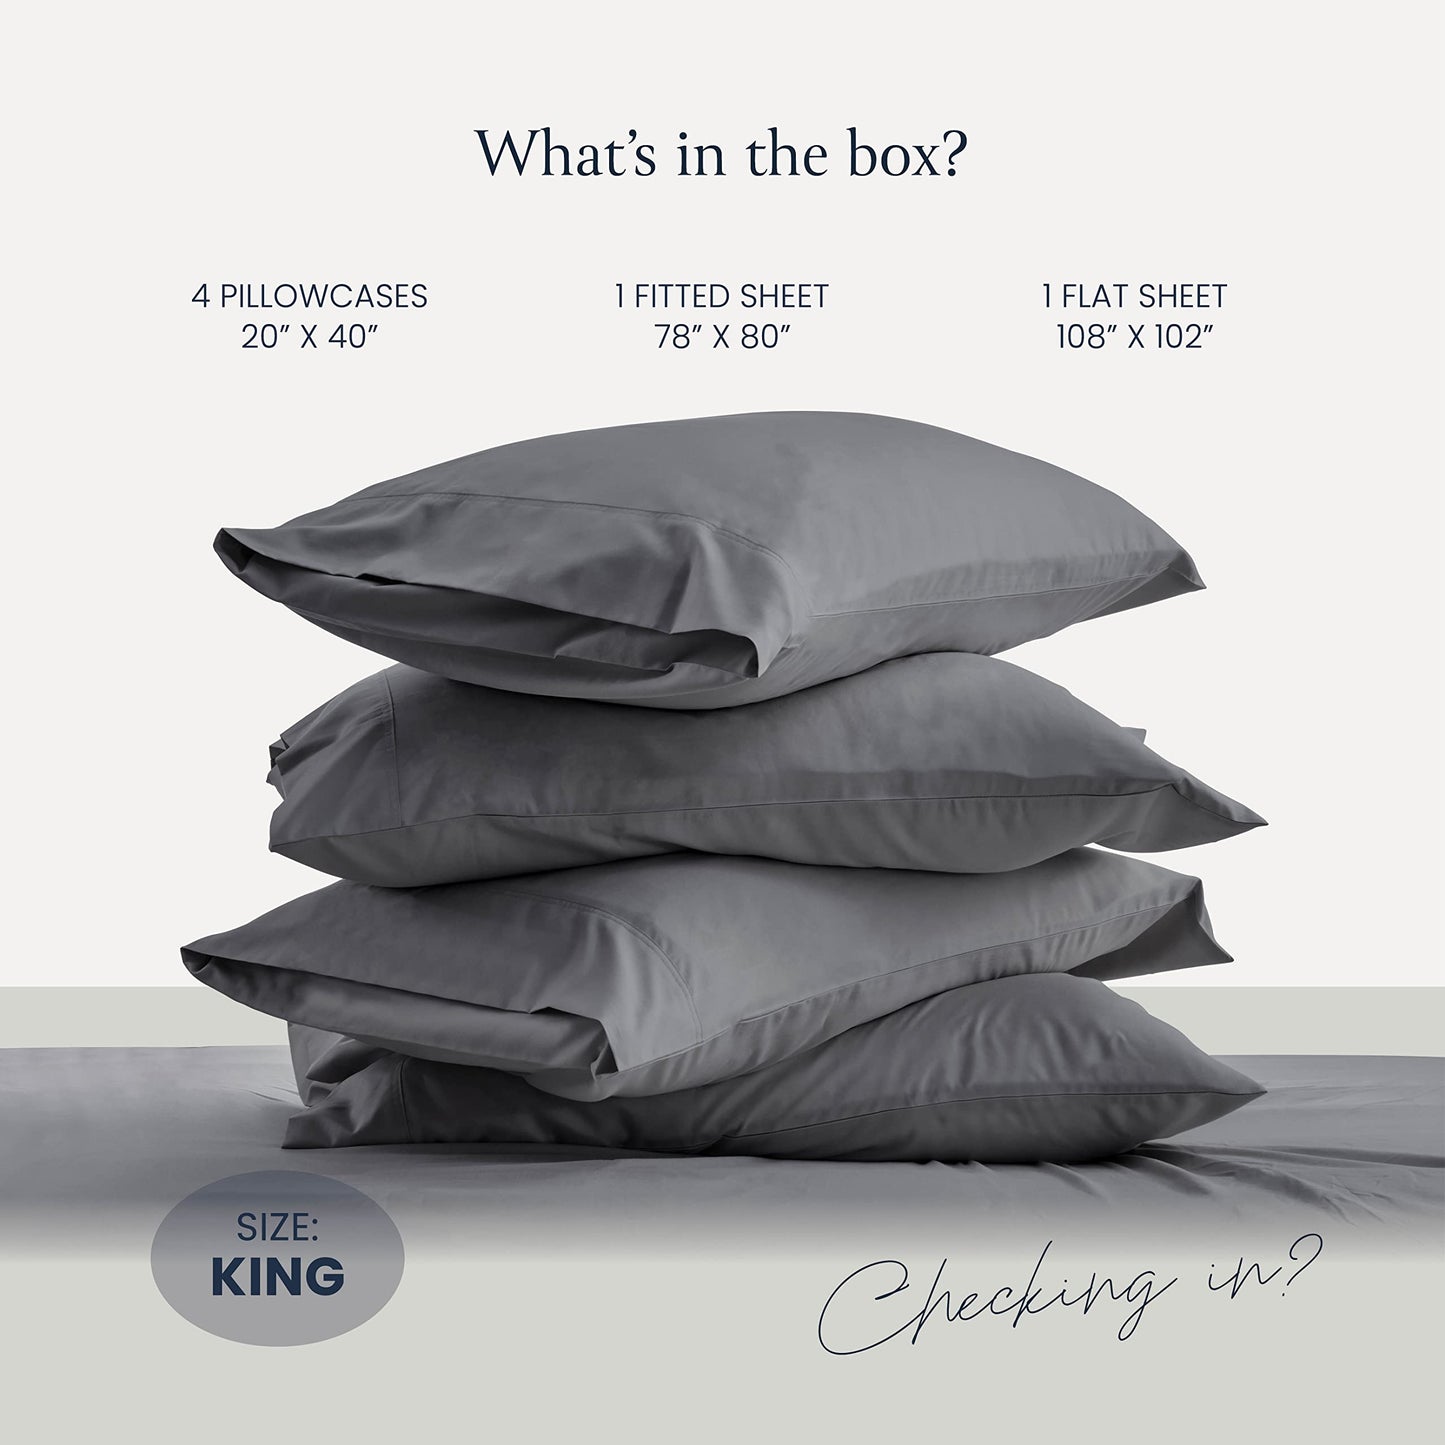 BELADOR Silky Soft King Sheet Set - 6 Piece Bed Sheets for King Size Bed, Secure-Fit Deep Pocket Sheets with Elastic, Breathable Hotel Sheets & Pillowcase Set, Wrinkle Free Oeko-Tex Sheets